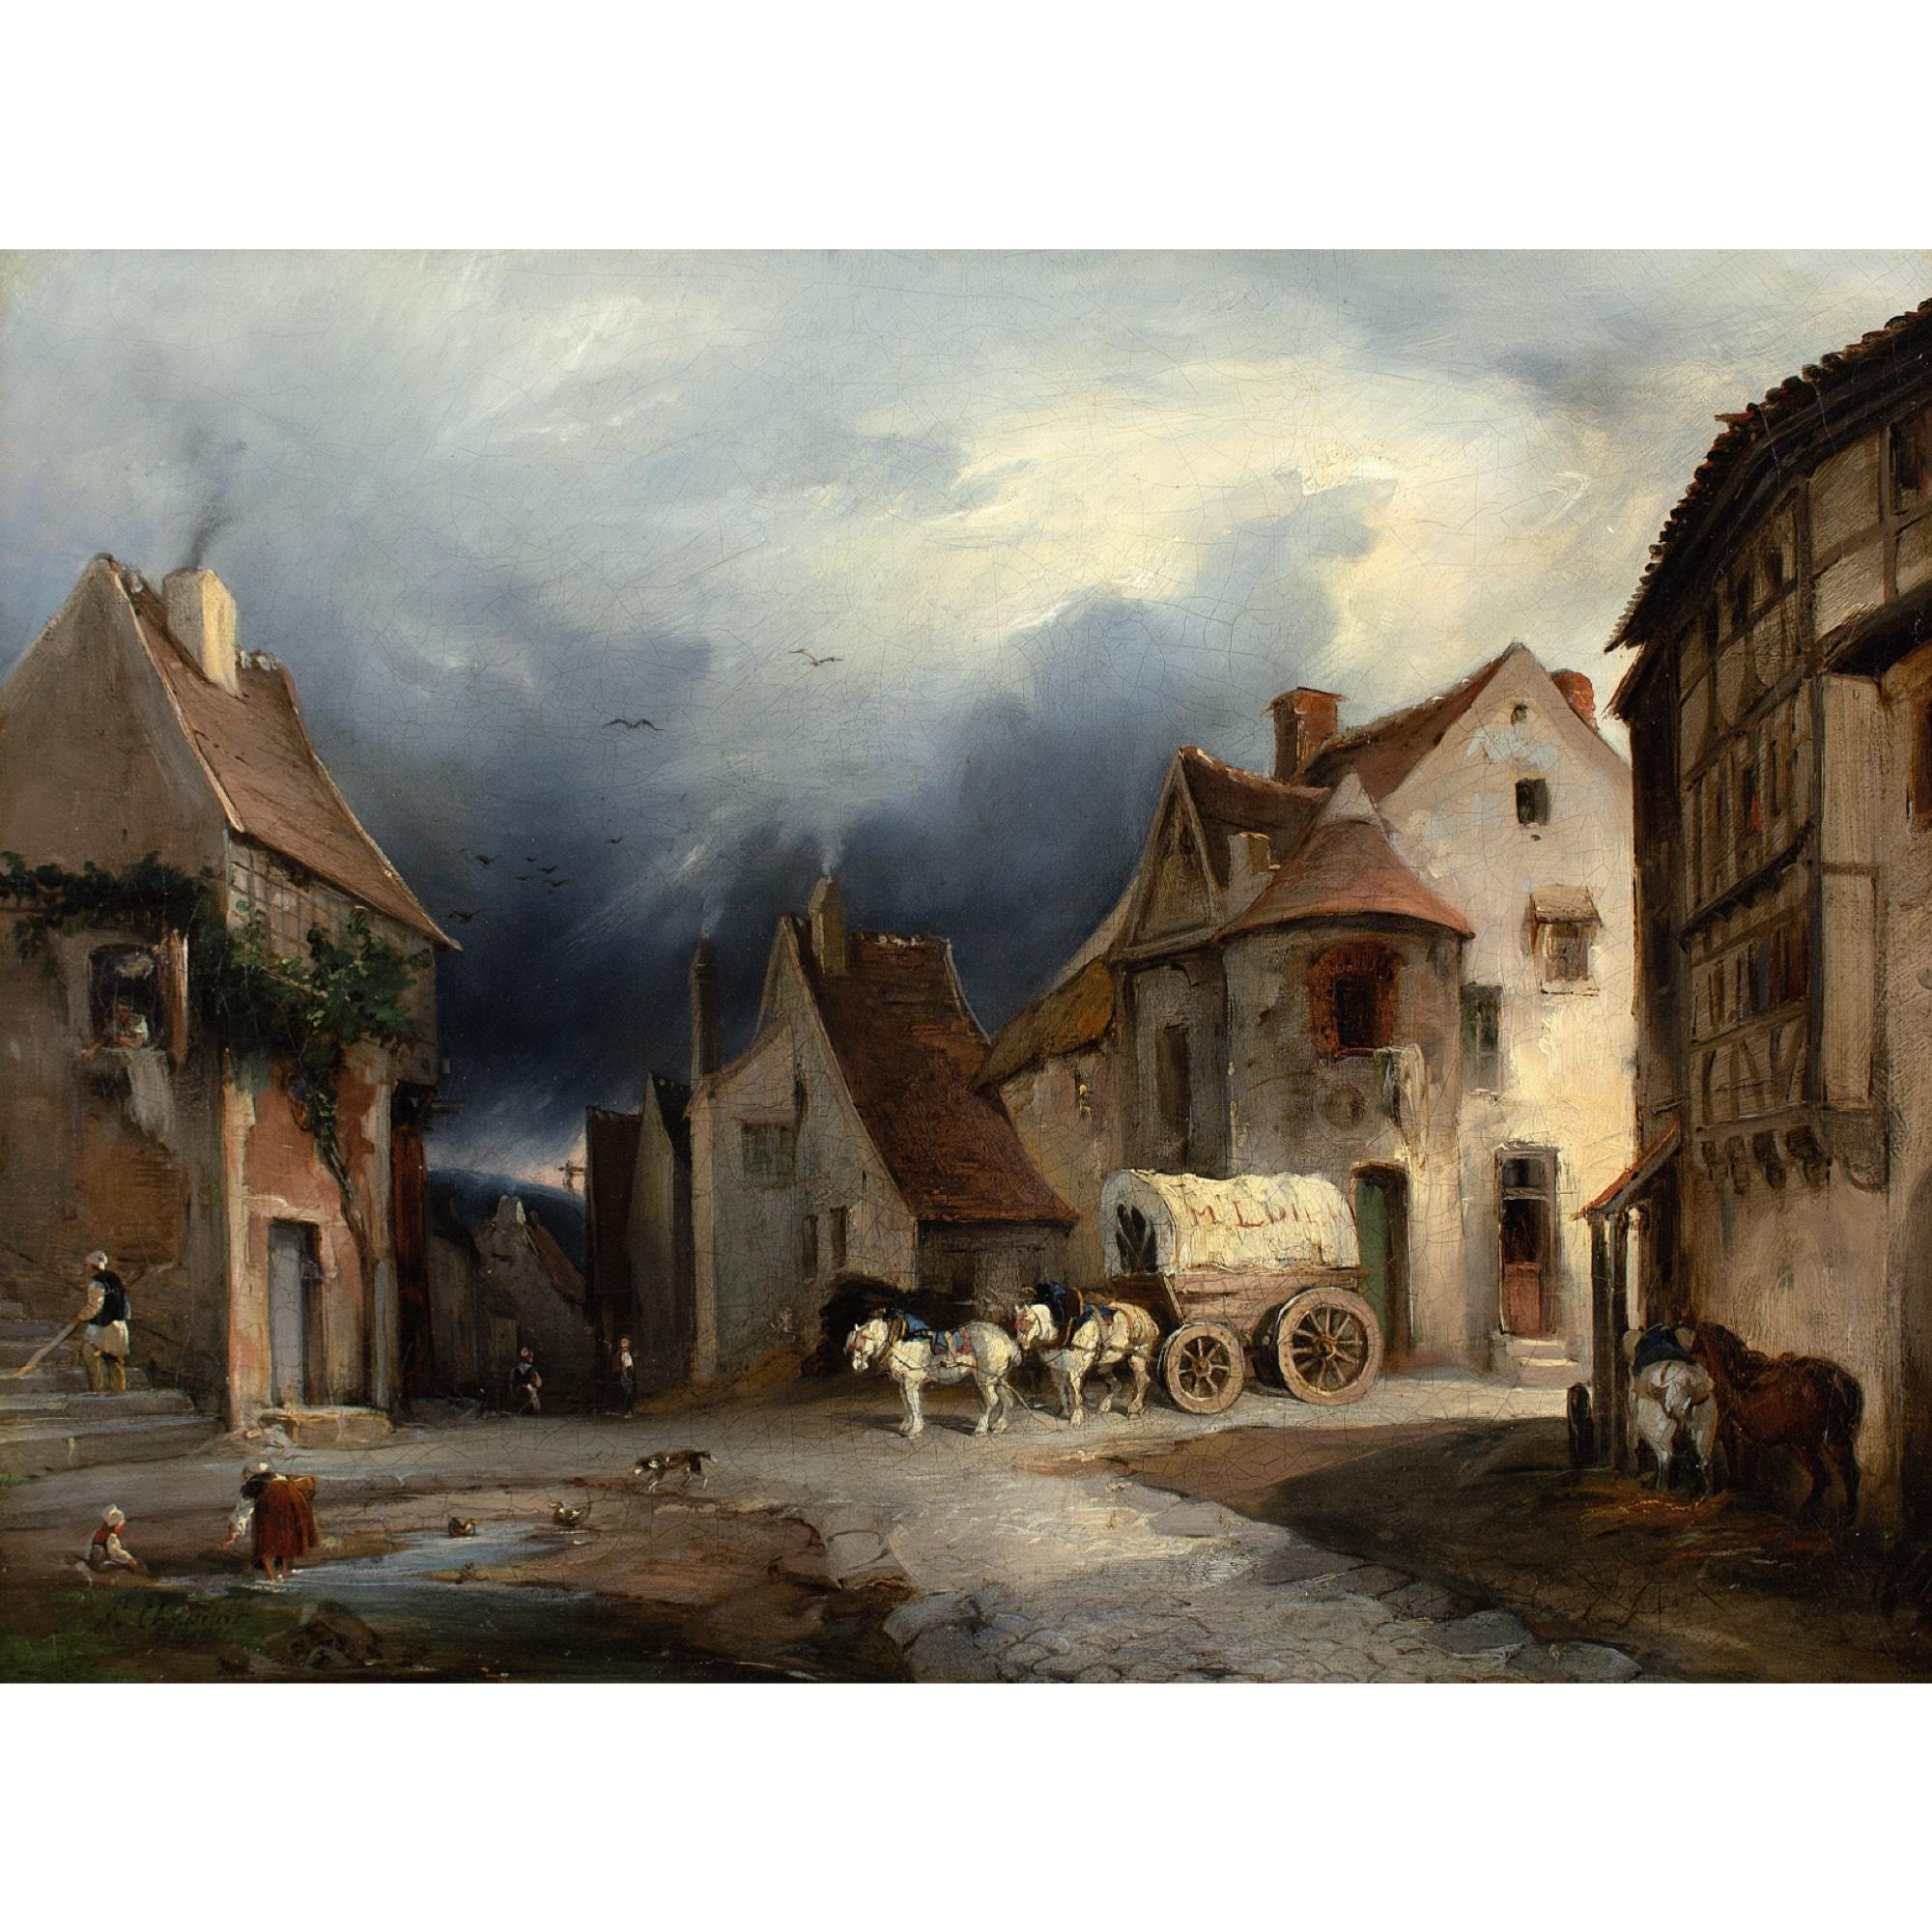 This mid-19th-century oil painting by French artist Henri-Jean Chasselat (1813-1880) depicts a continental town scene.

Four white horses, hitched to a covered wagon, wait patiently at a crossroads for their driver to return. Around them, an